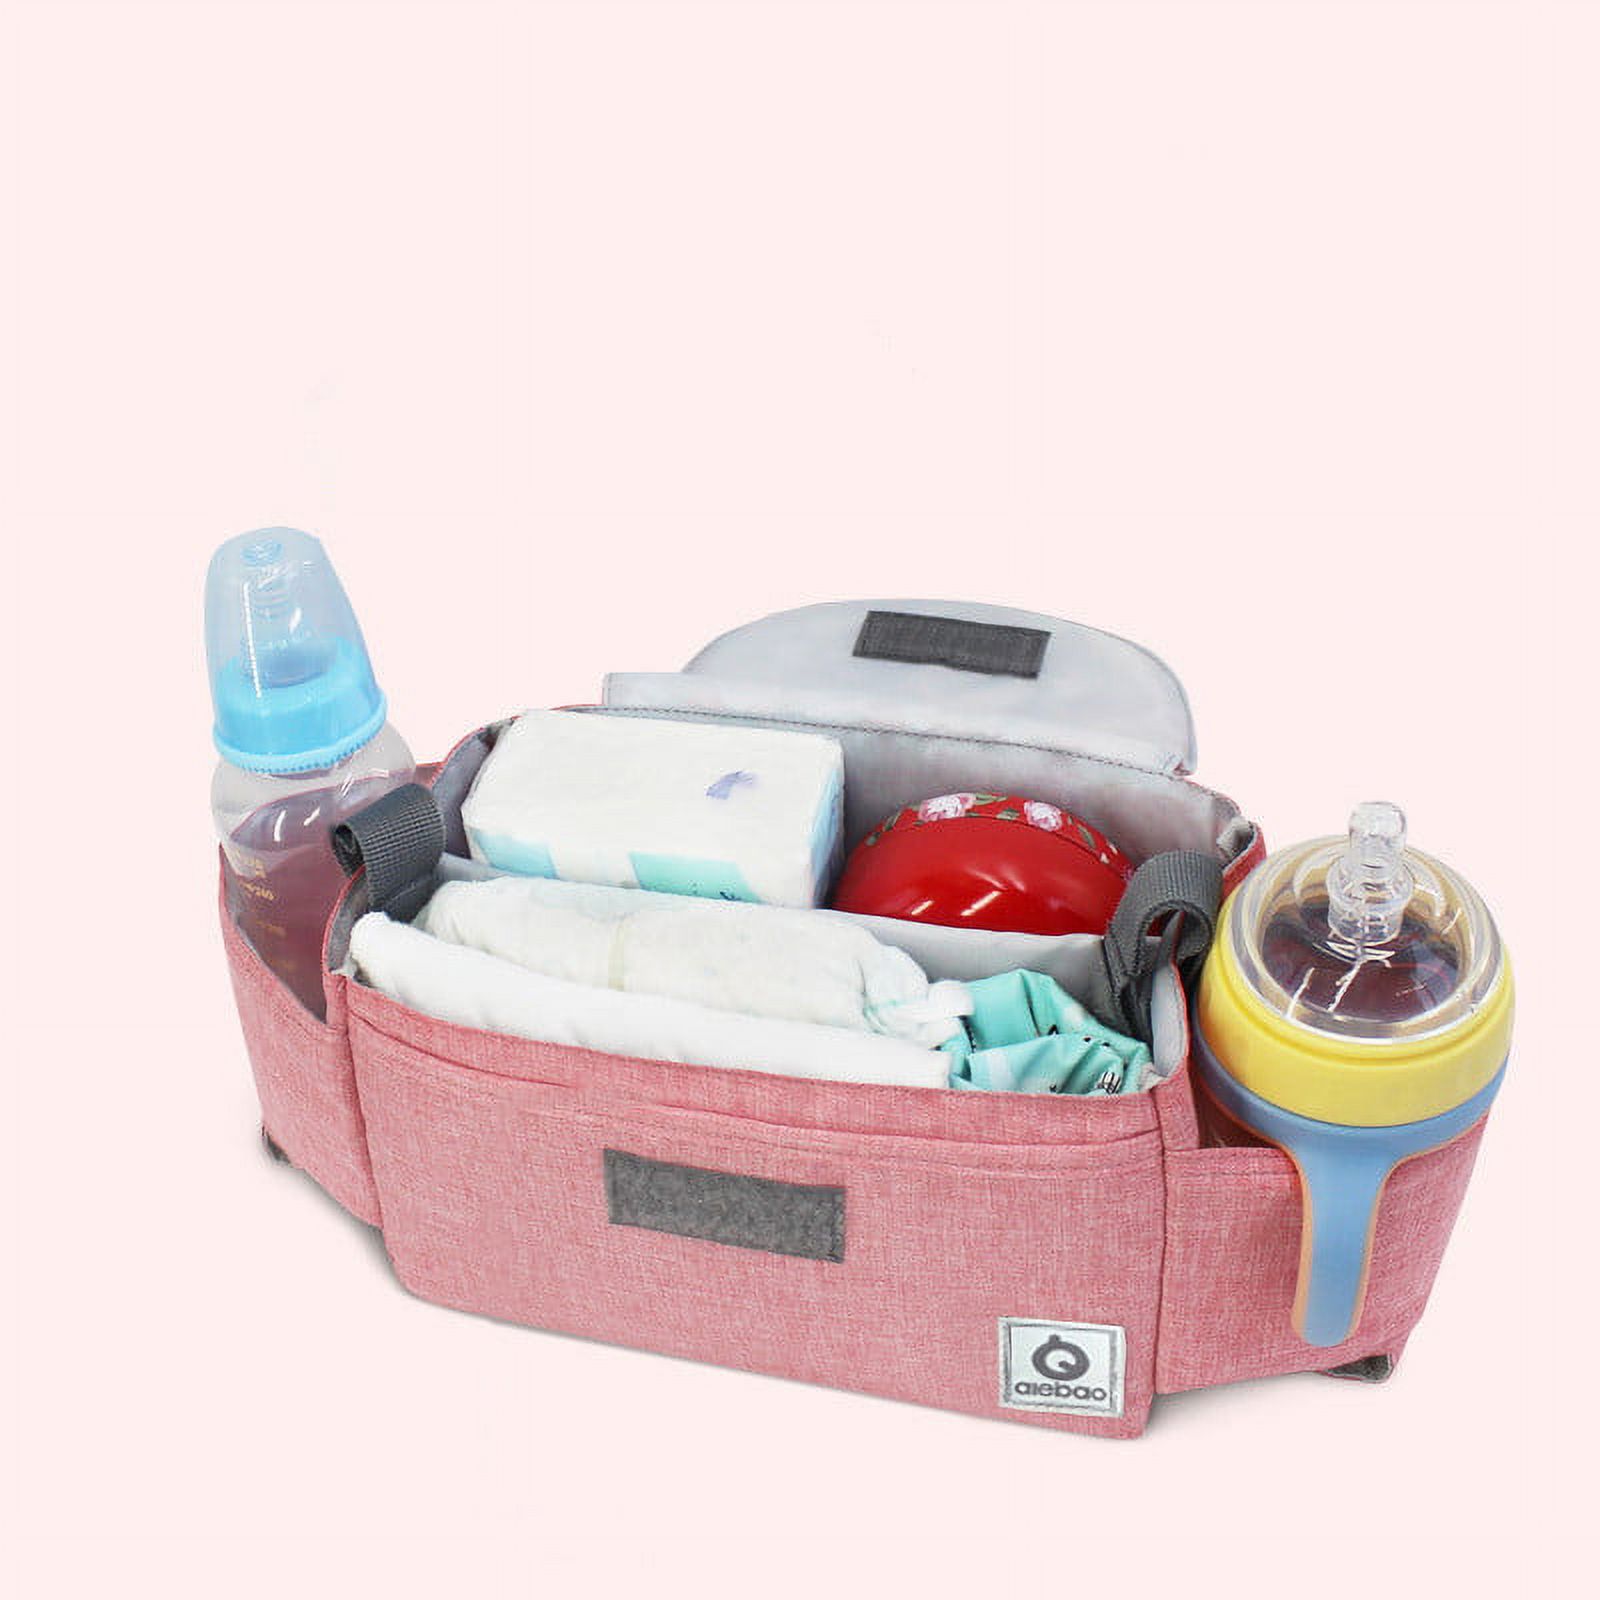 EIMELI Baby Stroller Organizer with Cup Holders and Diaper Bag,Stroller Accessories Organizer Bag,Large Storage Space Baby Travel Bag,Baby Stroller Hanging Bag, Fit Most Stroller Models -Pink - image 3 of 7